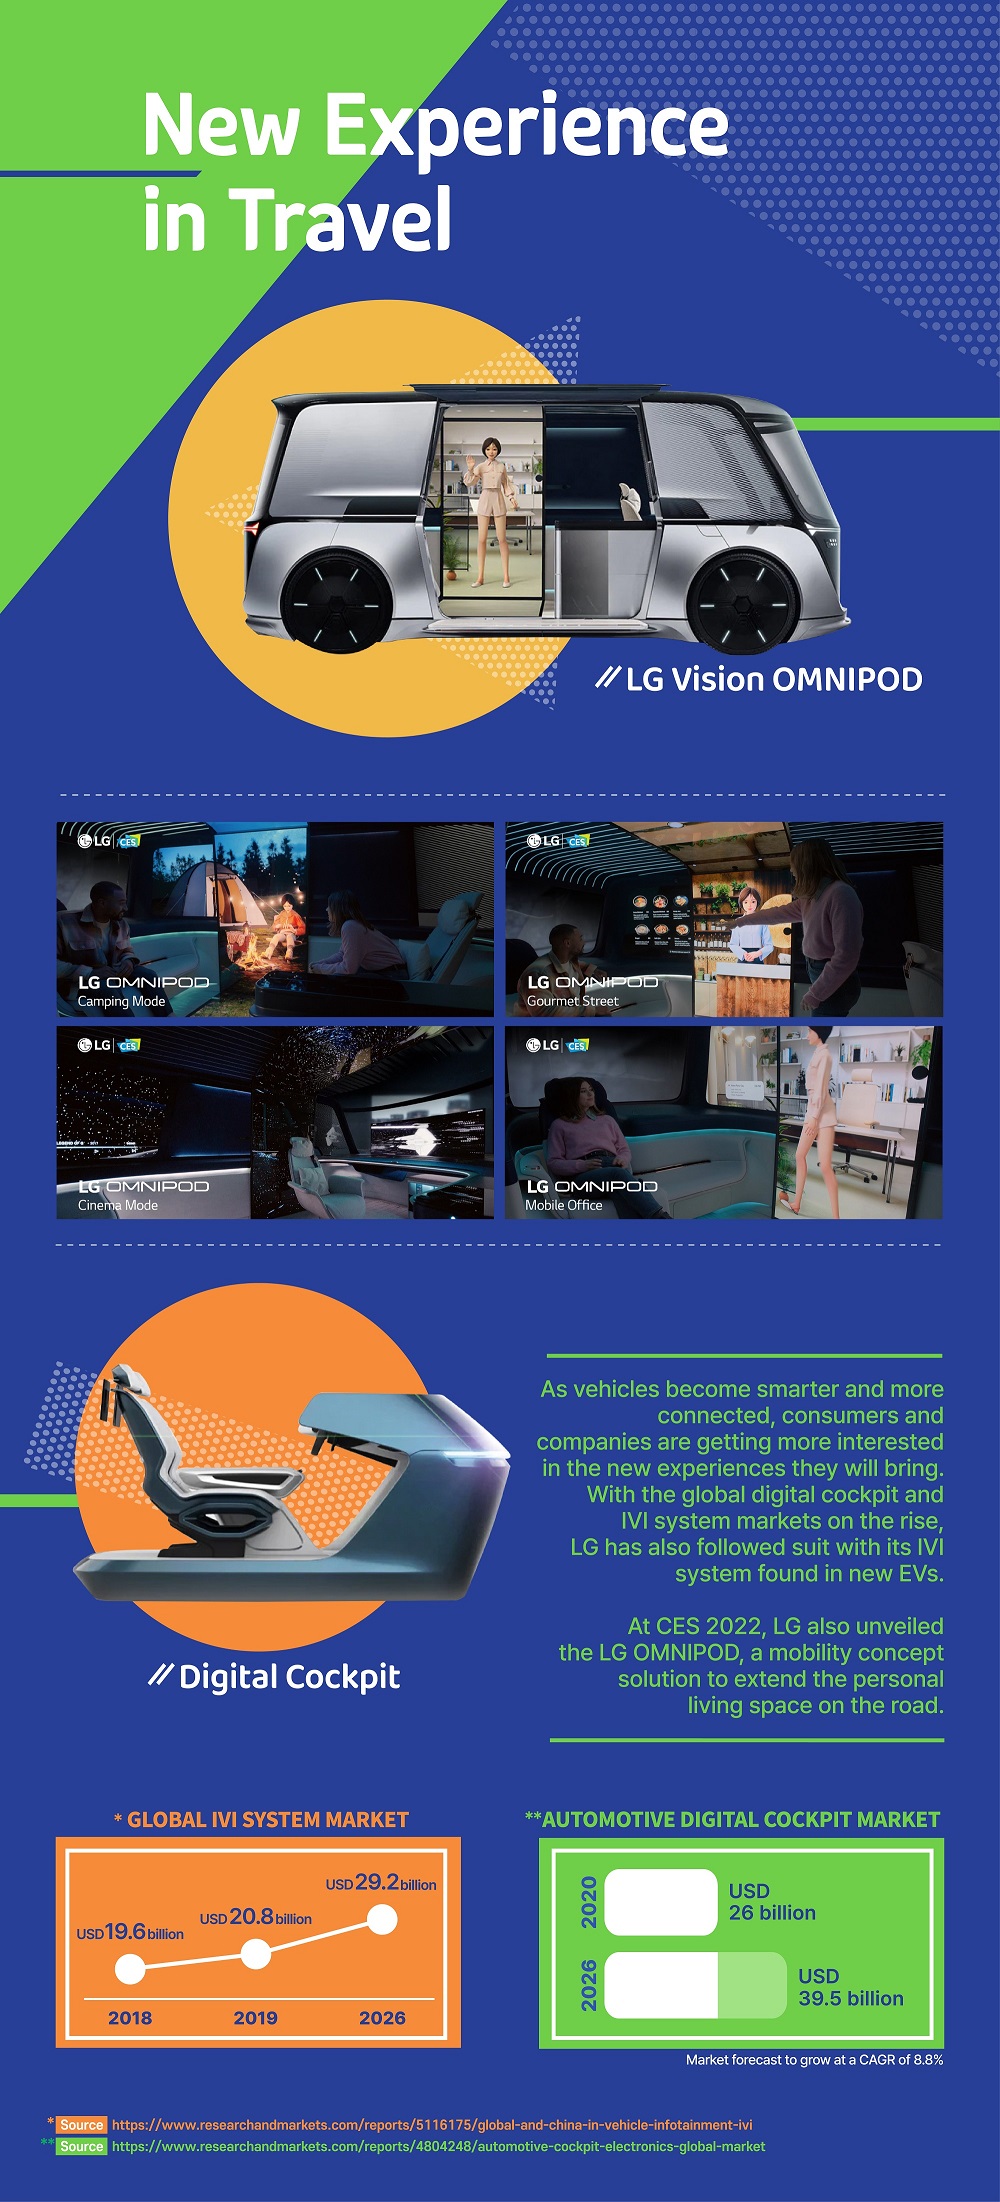 An overall look of the story related to future vehicle with photos of LG Omnipod and Digital Cockpit as well as some graphs that describe the anticipated market growth of IVI system and automotive digital cockpit
